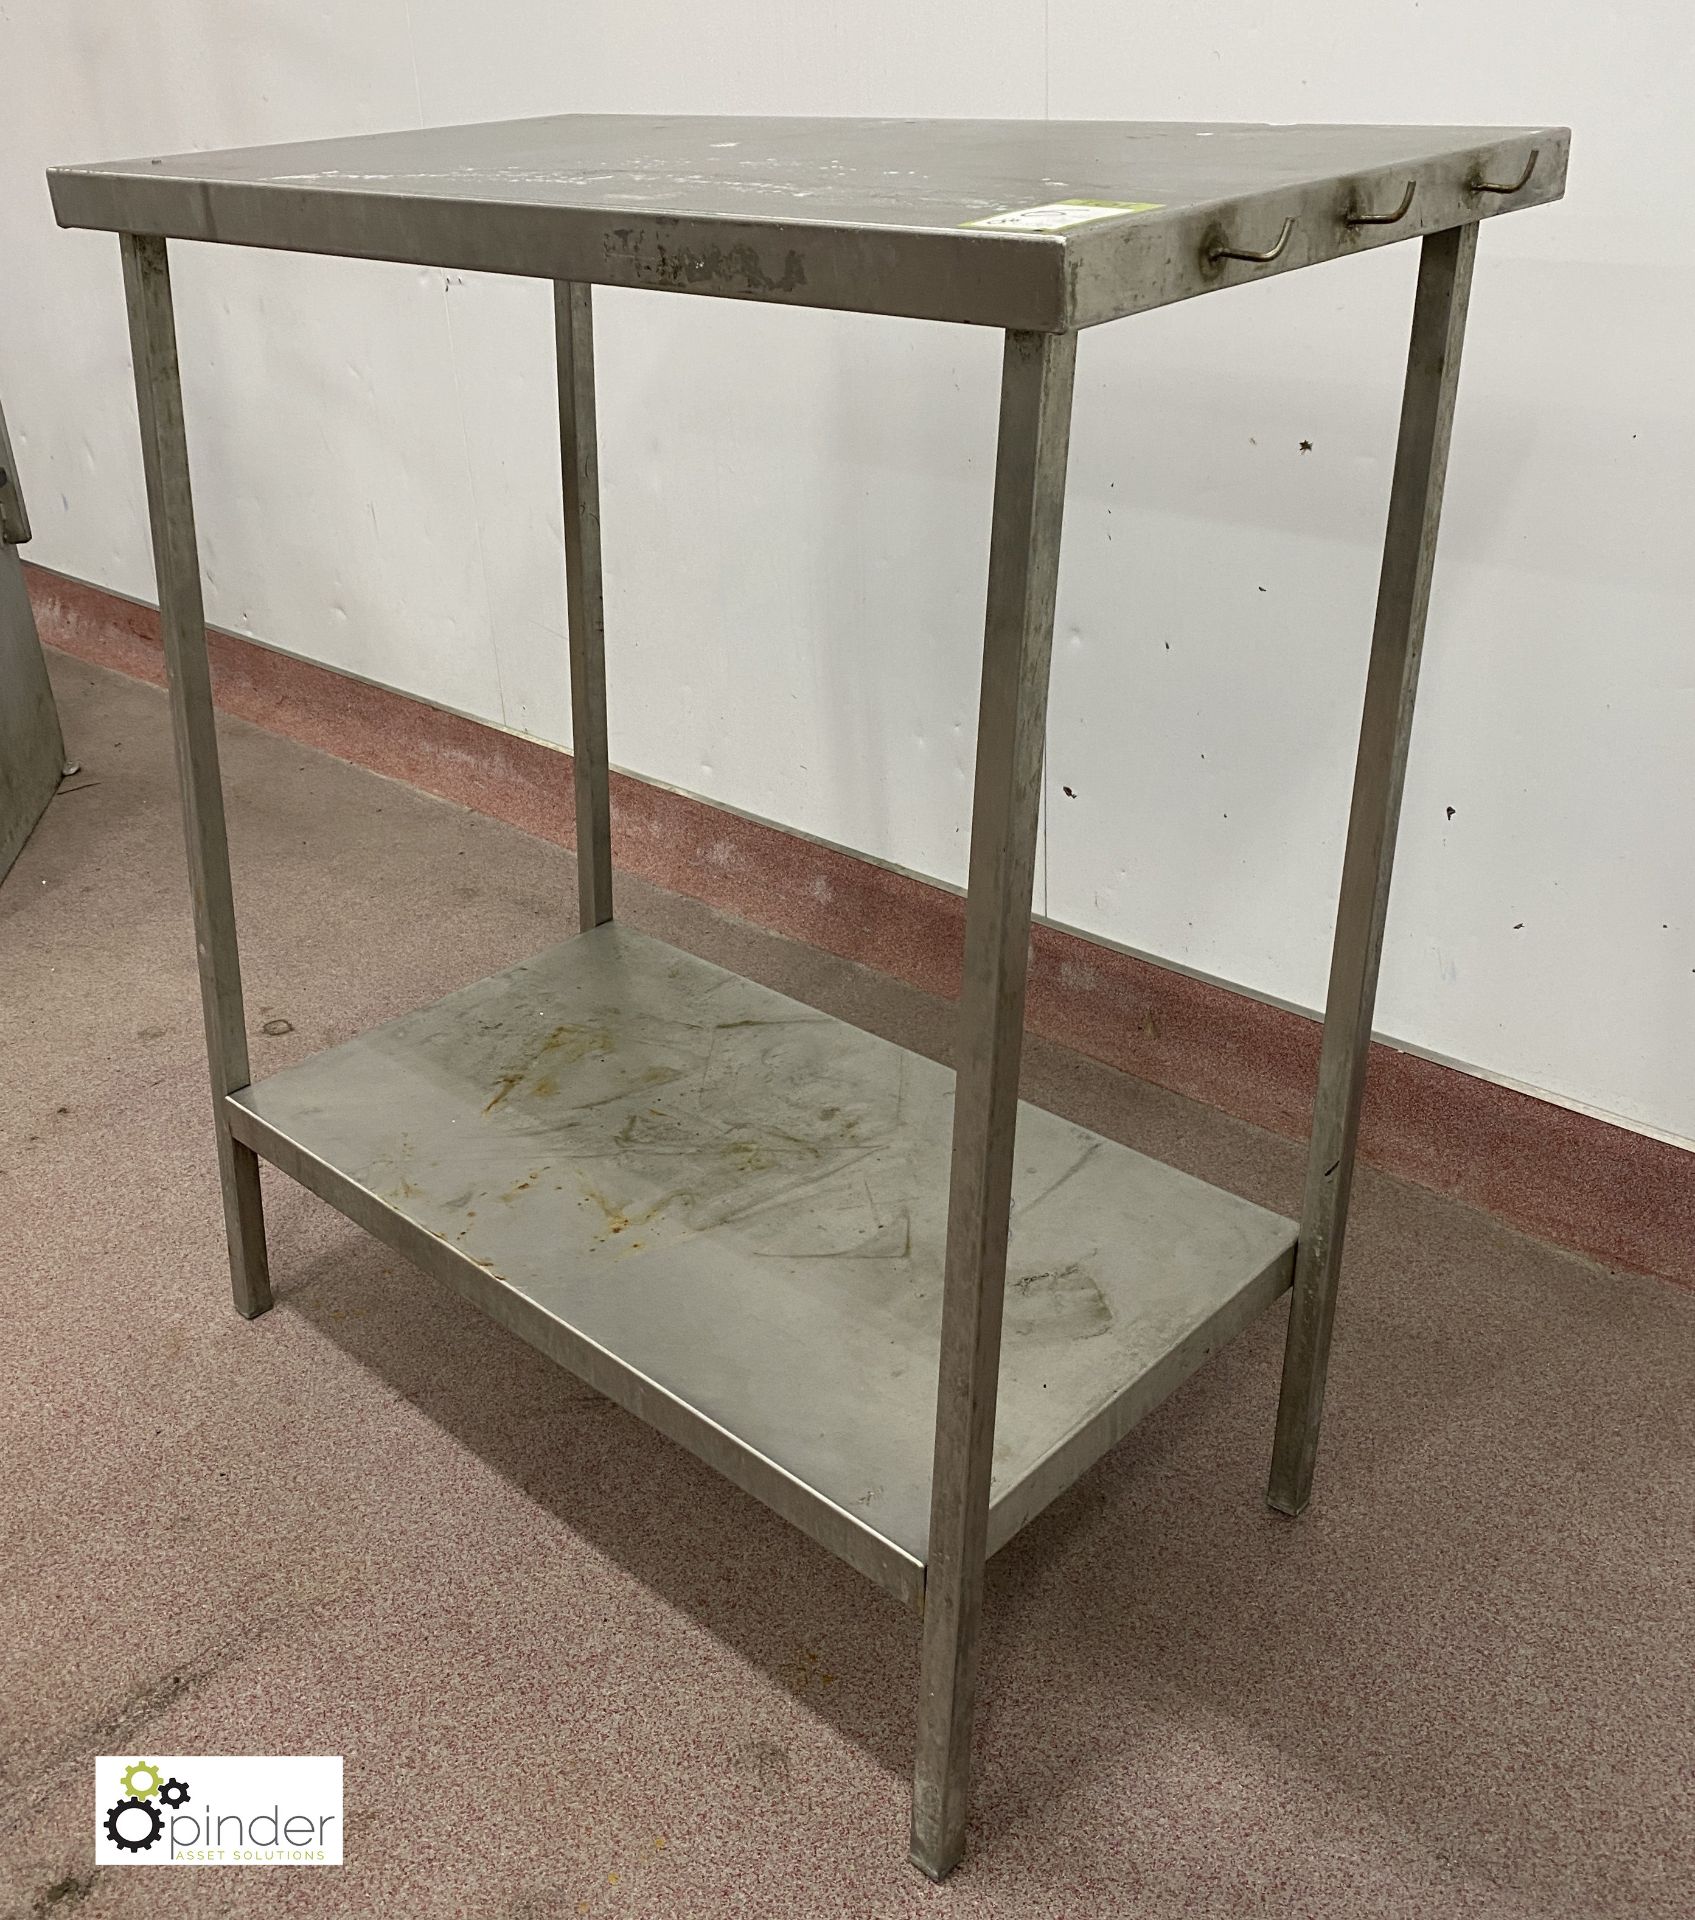 Stainless steel high Preparation Table, 1100mm x 600mm x 1175mm (please note there is a lift out fee - Image 2 of 2